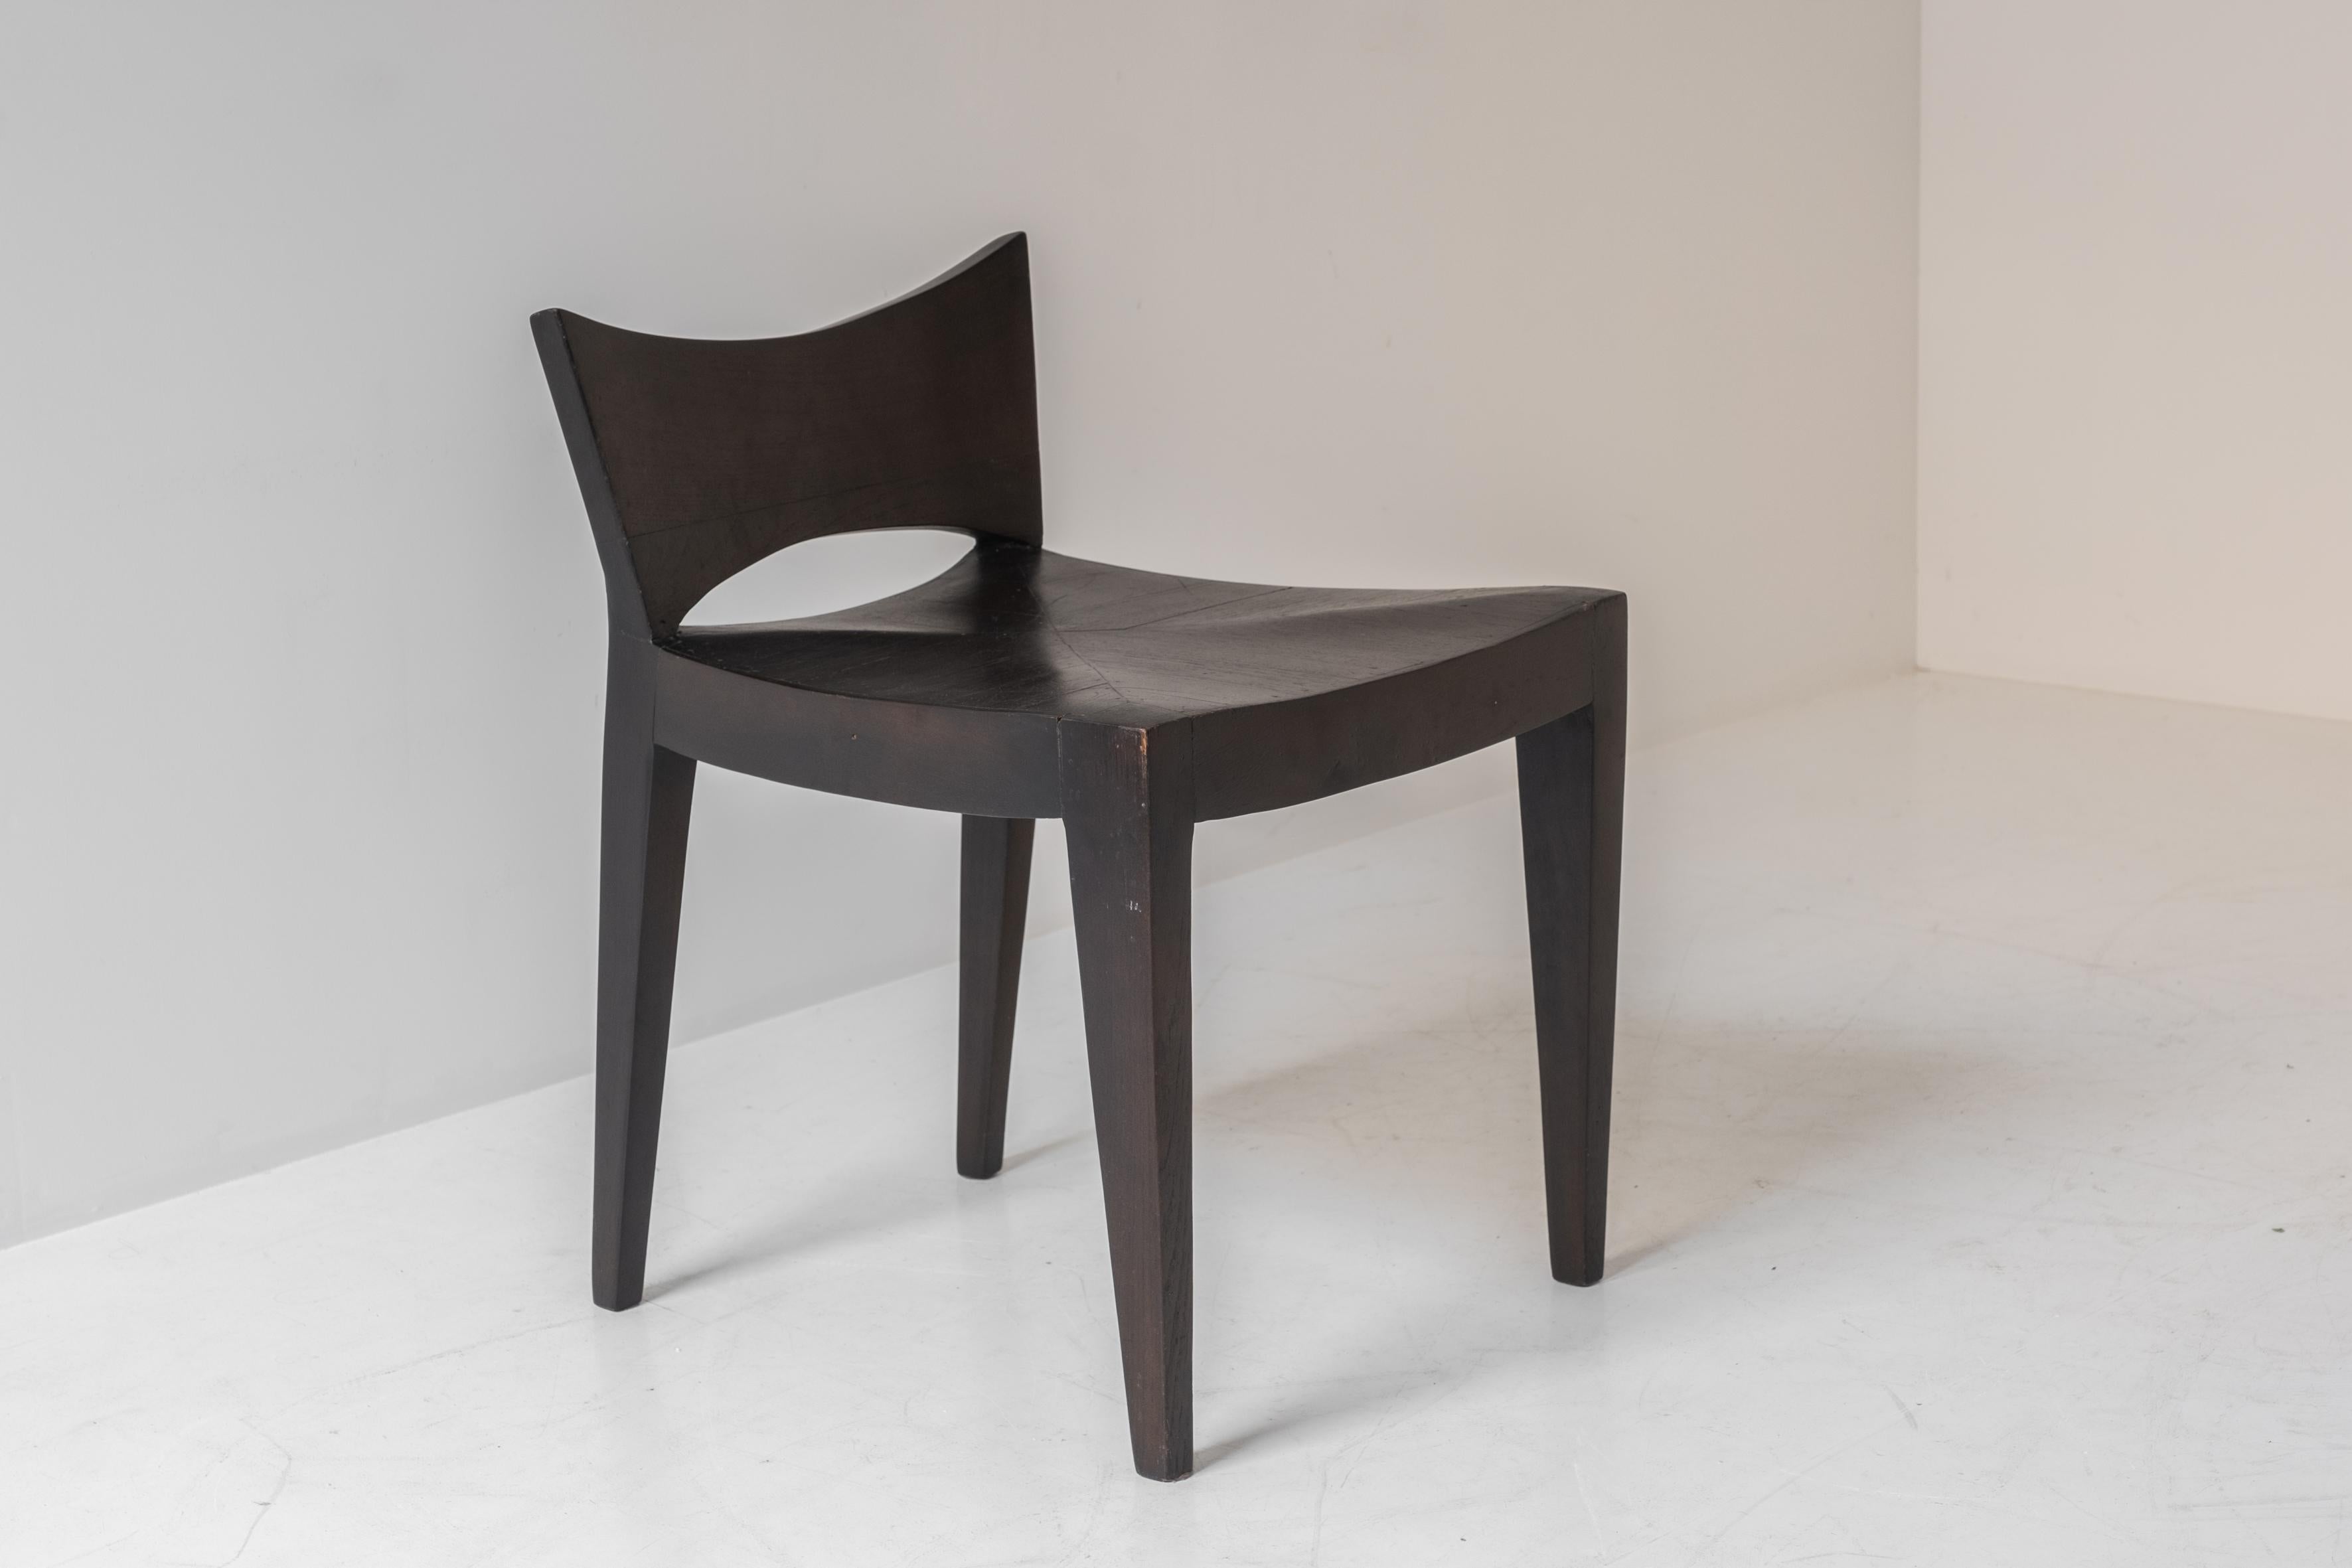 Modernist Dining Chairs in Stained Oak from France, Dating from the 1960s For Sale 6